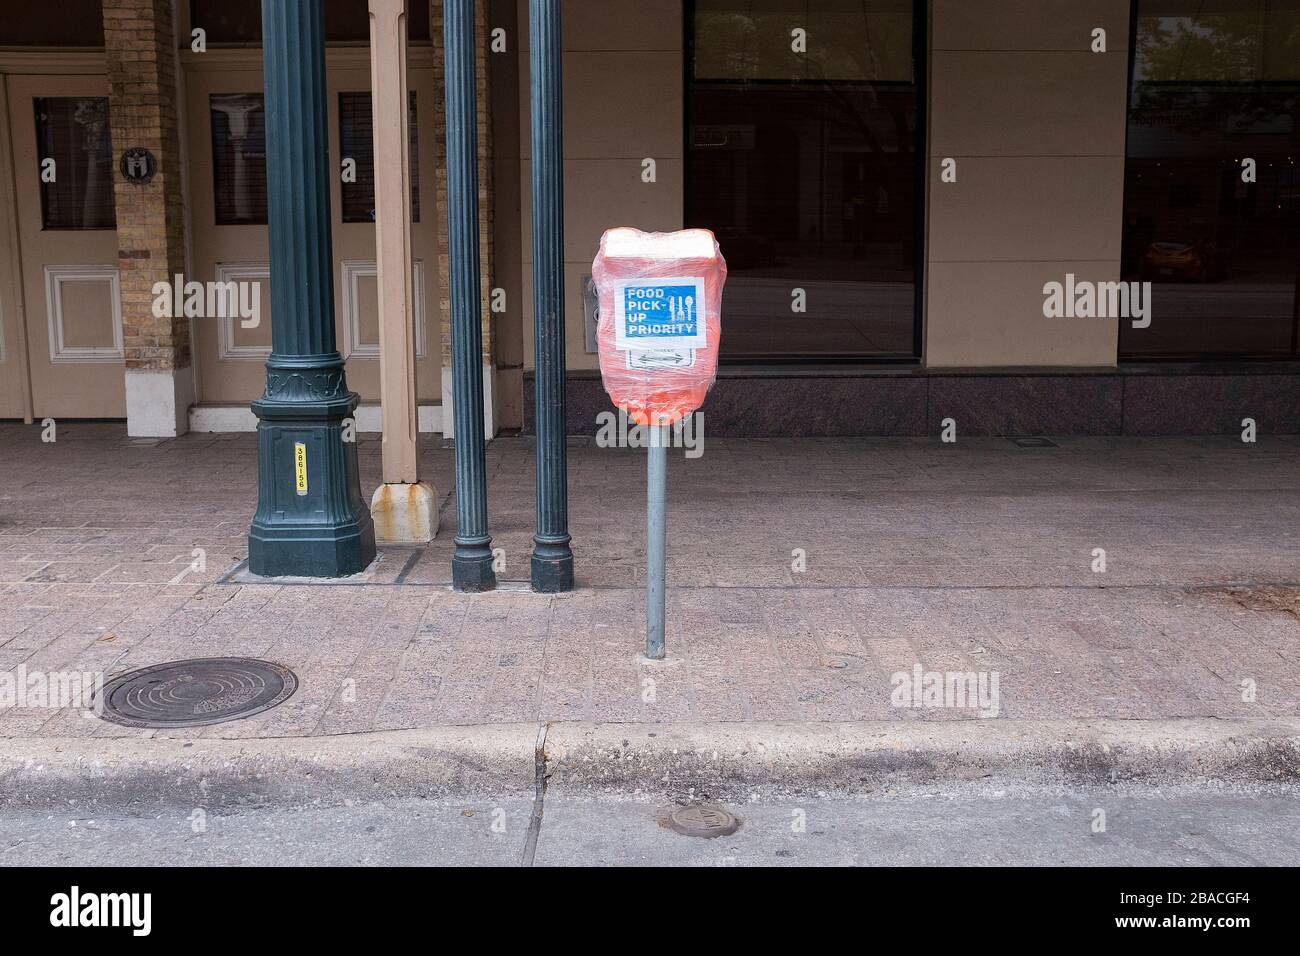 Downtown Austin. 26th Mar, 2020. The world wide Pandemic Covid-19 impacts a parking meter where citizens would normally park in Downtown Austin. The parking meter area has been designated for food pick up priority. Austin, Texas. Mario Cantu/CSM/Alamy Live News Stock Photo